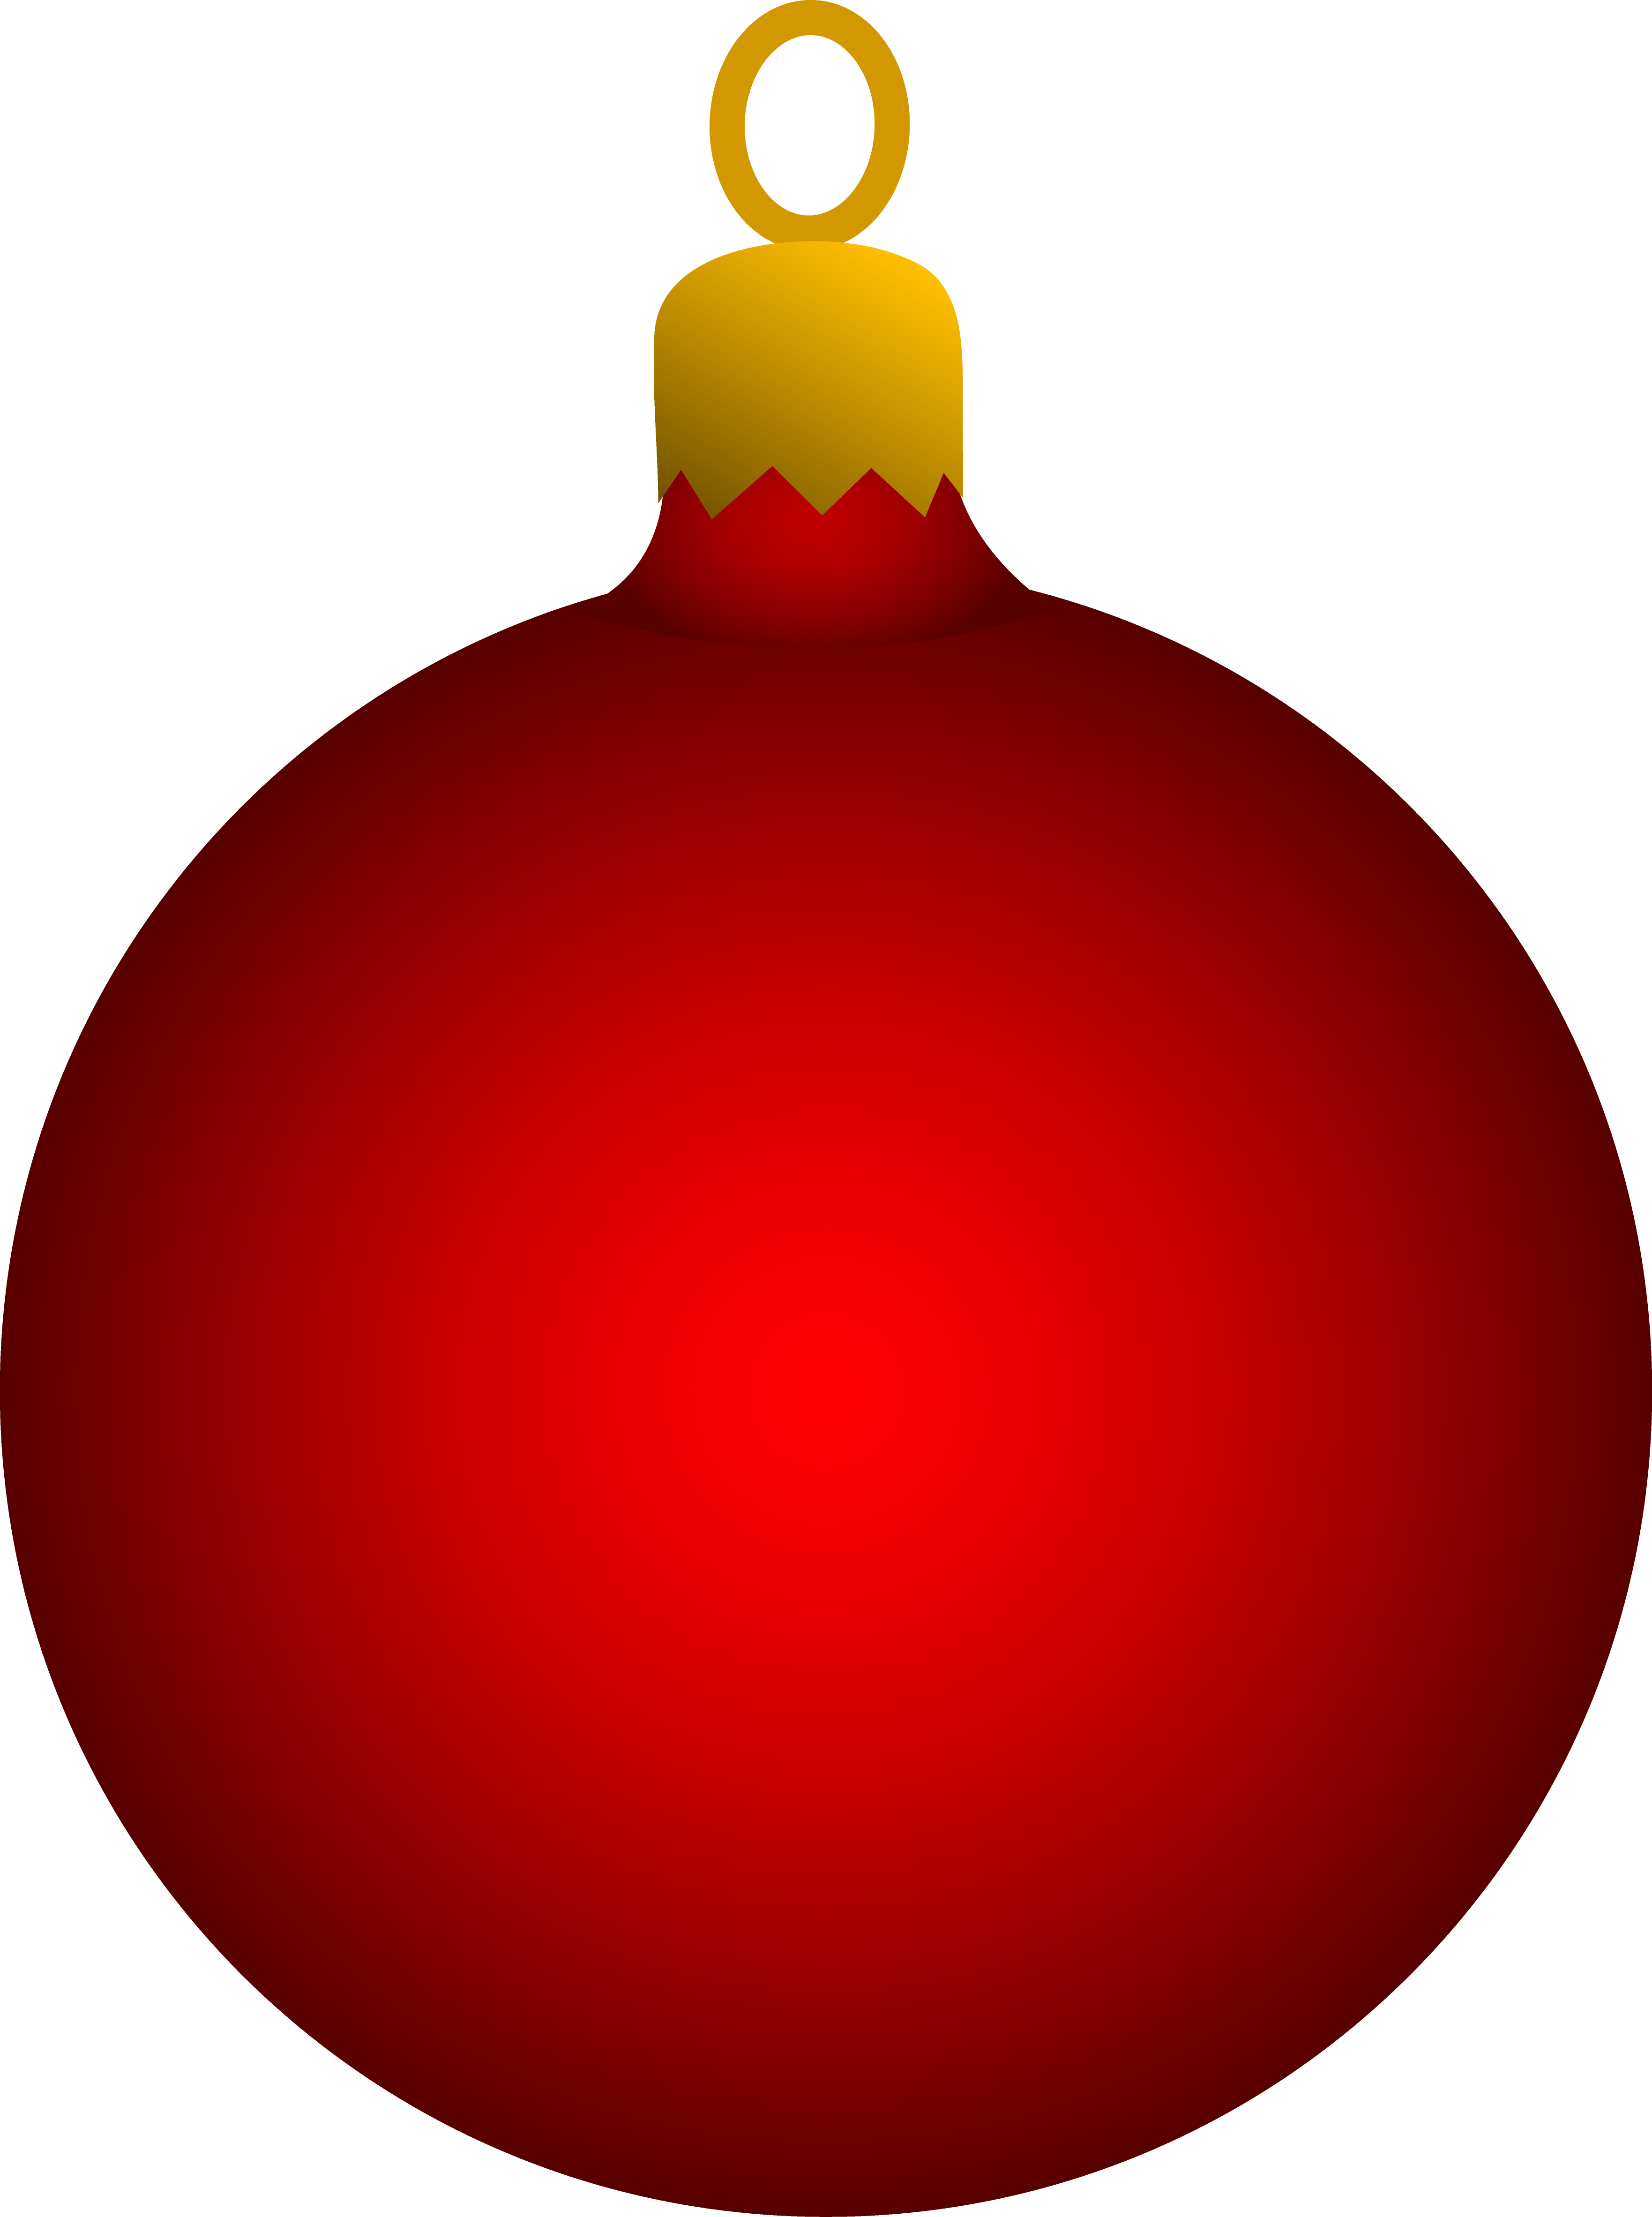 Clip Art Christmas Ornaments | Clipart library - Free Clipart Images